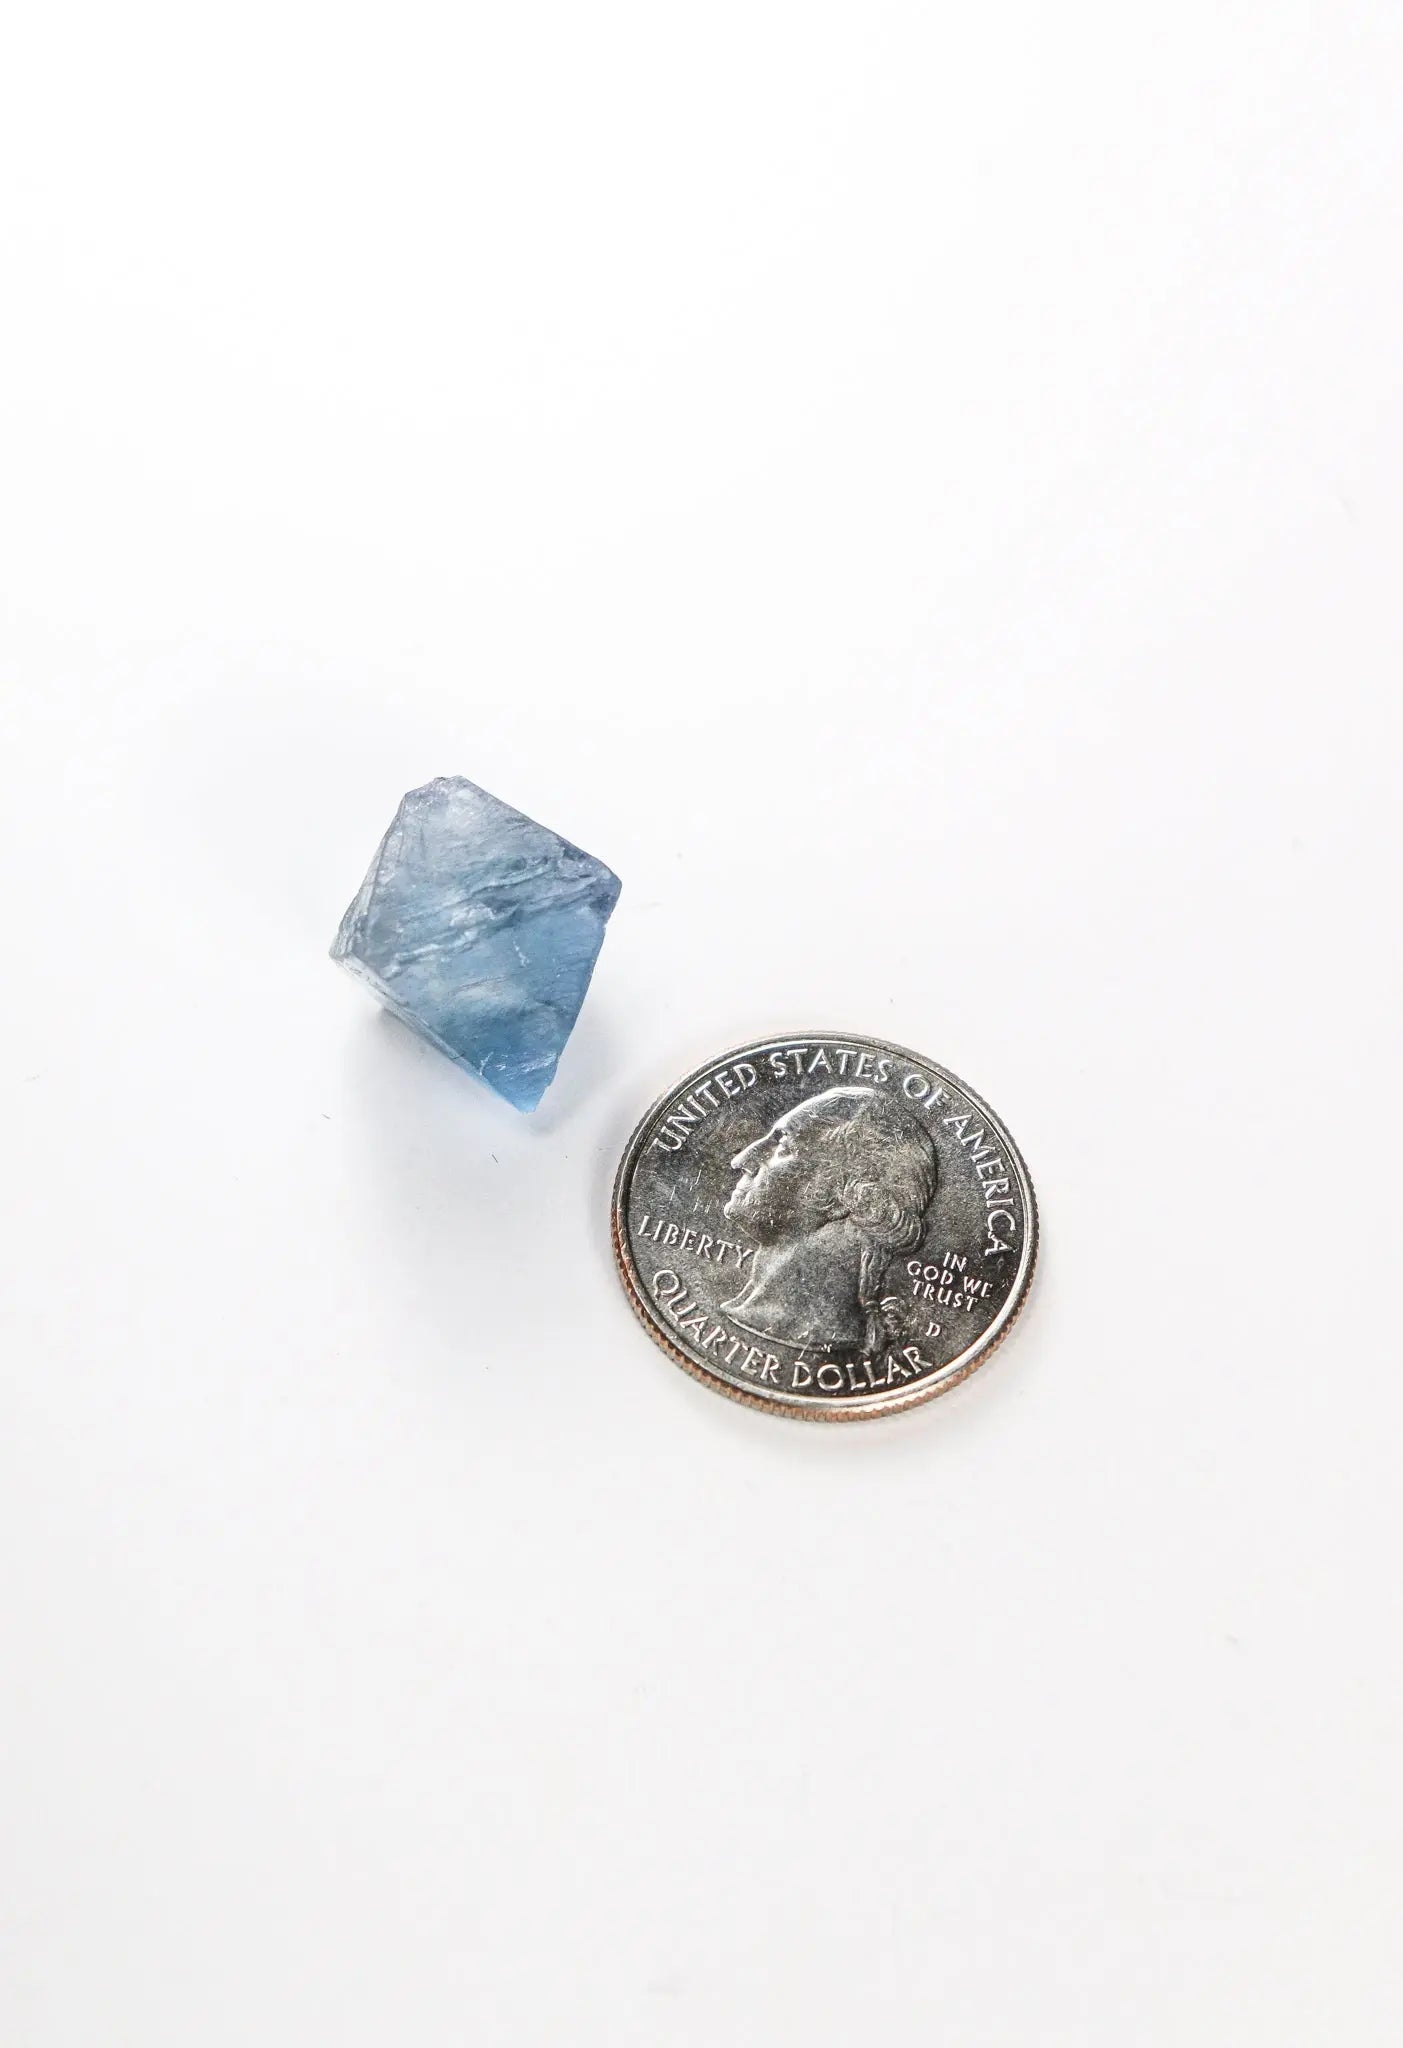 Fluorite Octahedron - THE STEMCELL SCIENCE SHOP